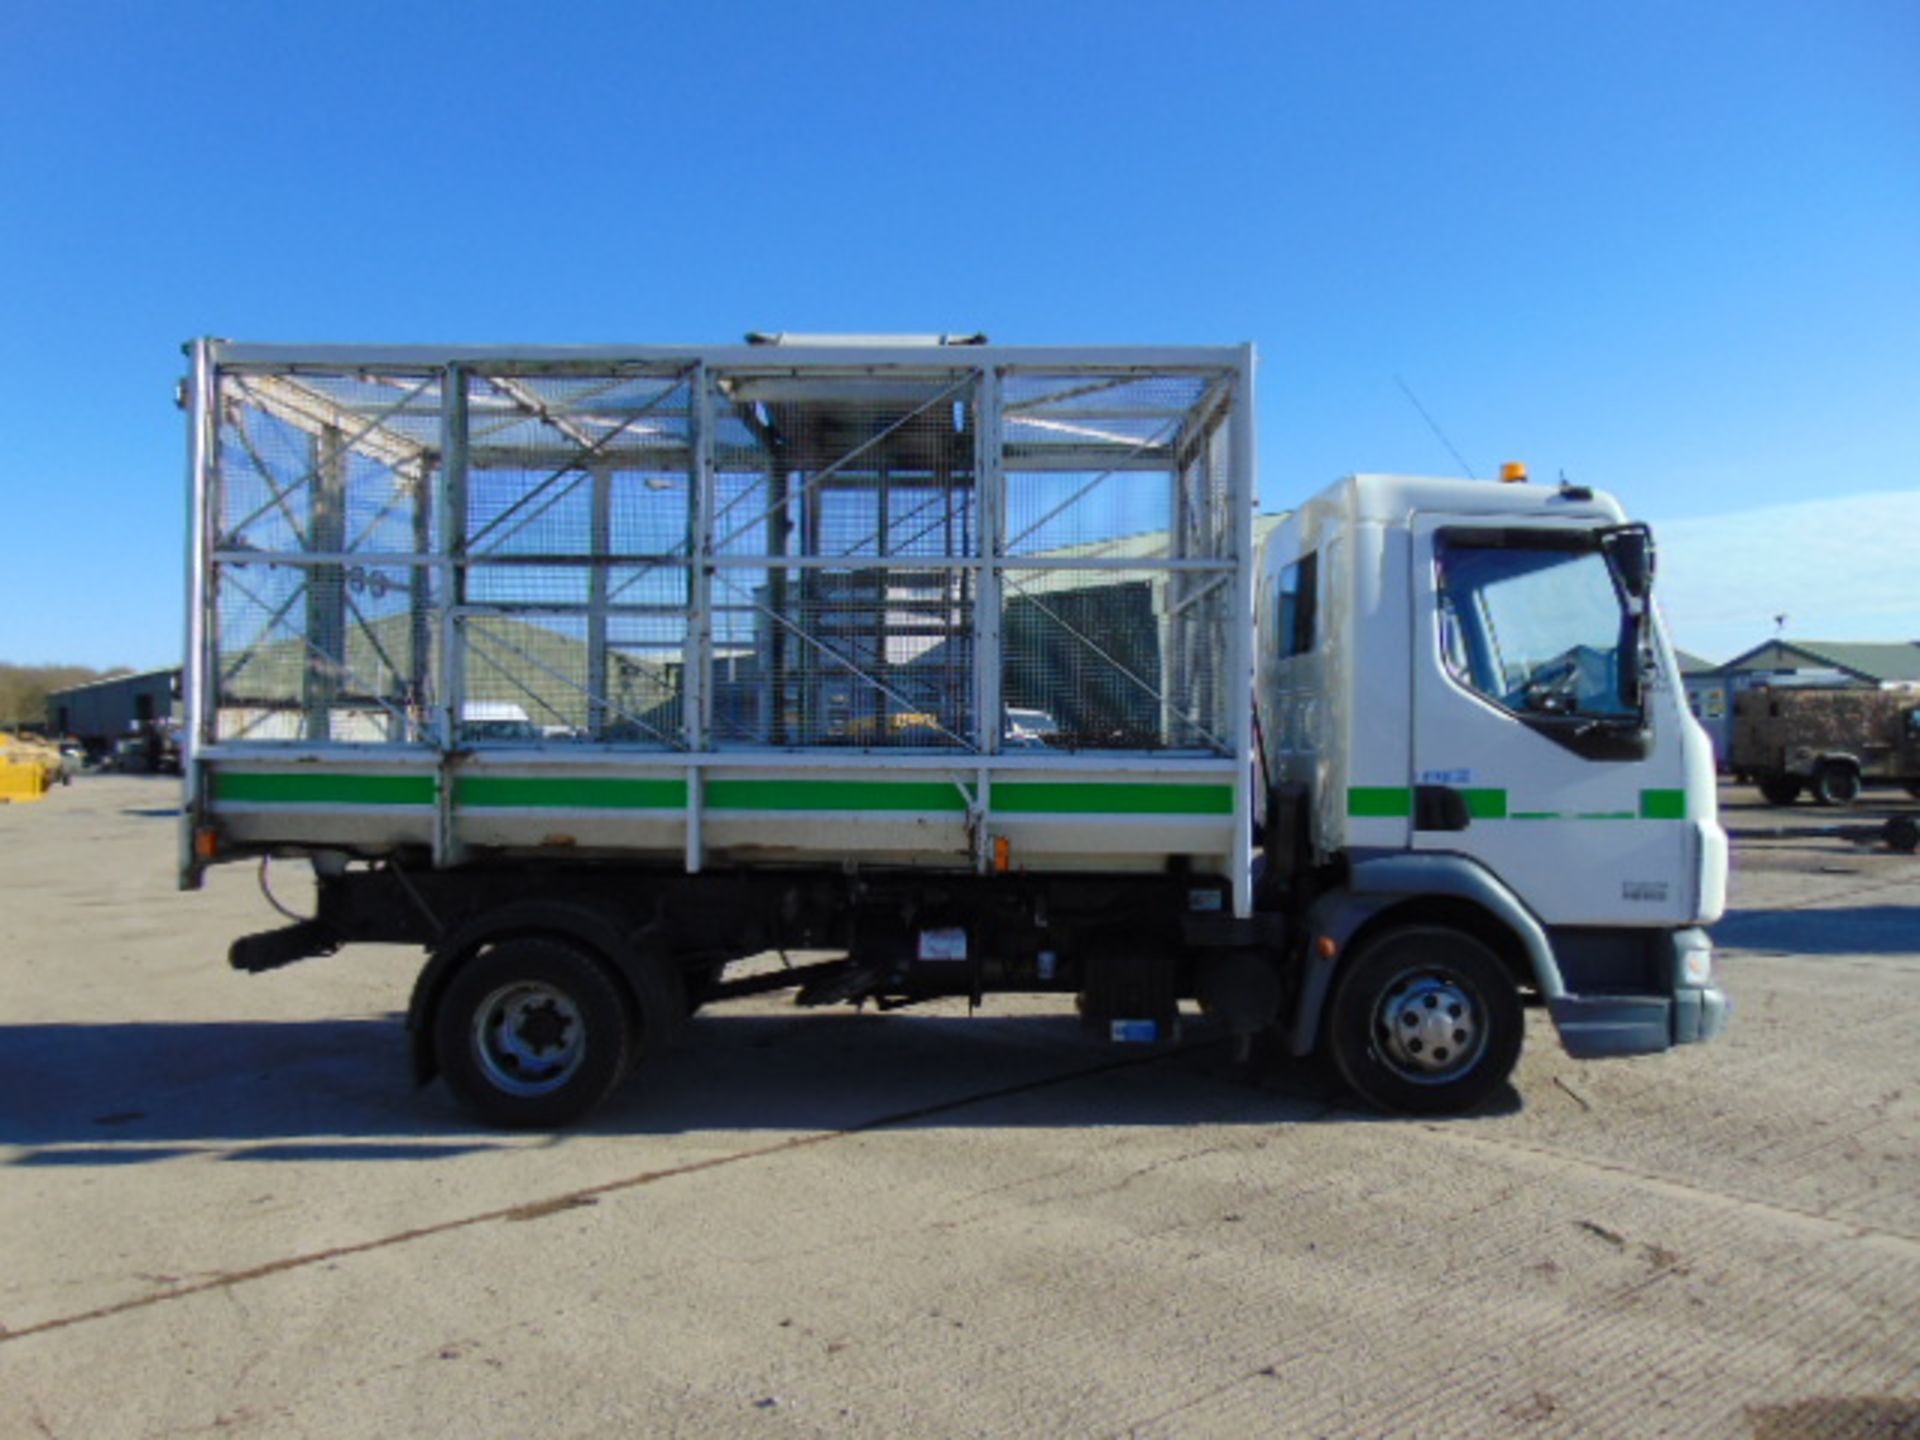 2008 DAF LF 45.140 C/W Refuse Cage, Rear Tipping Body and Side Bin Lift - Image 8 of 26